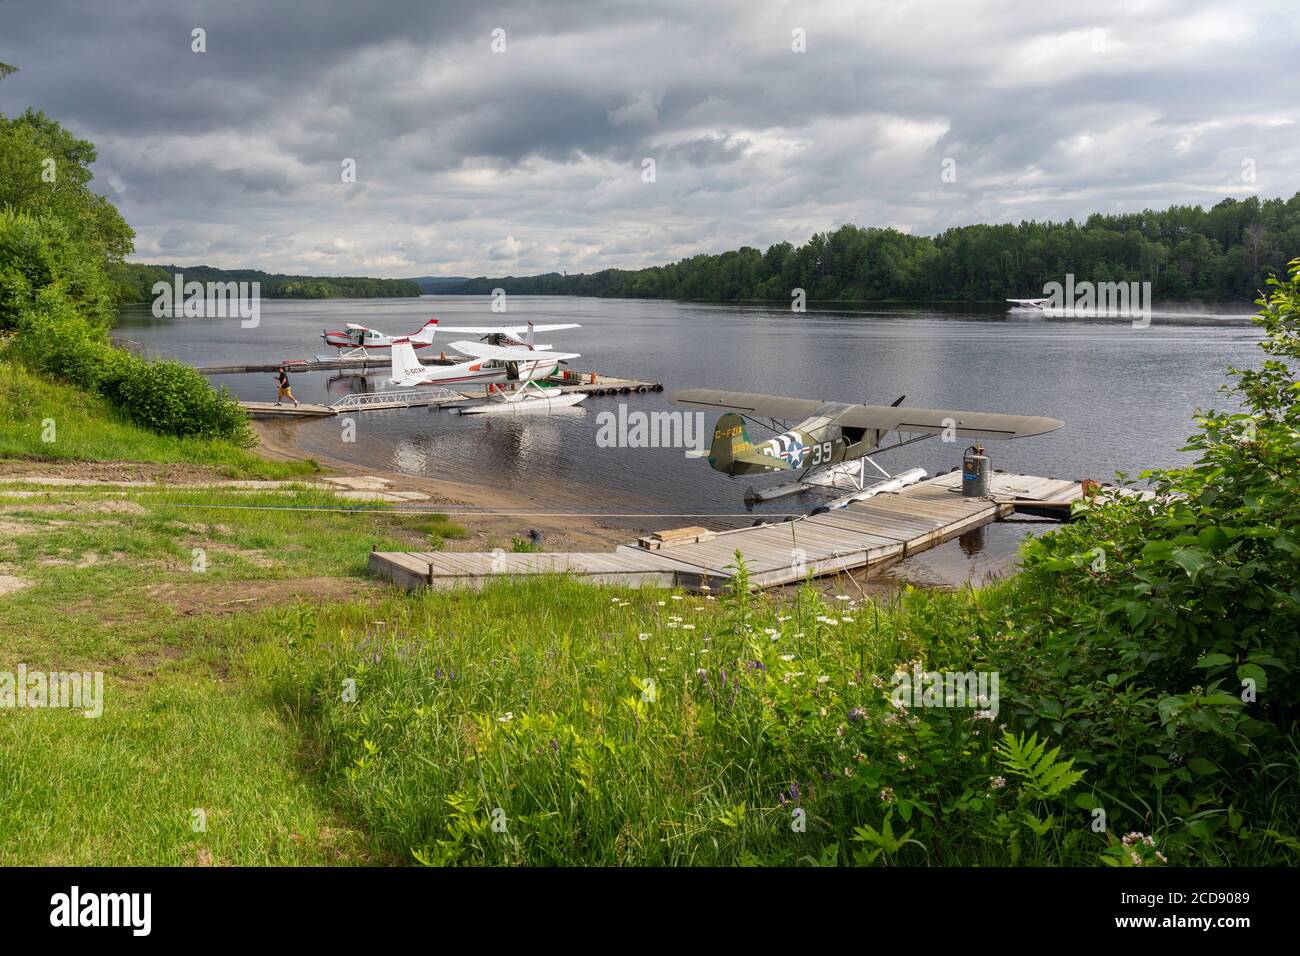 Canada, Province of Quebec, Mauricie region, Hydravion Aventure, the docks in which are seen the seaplanes on the hydrobase installed along the Saint-Maurice river under a stormy sky Stock Photo